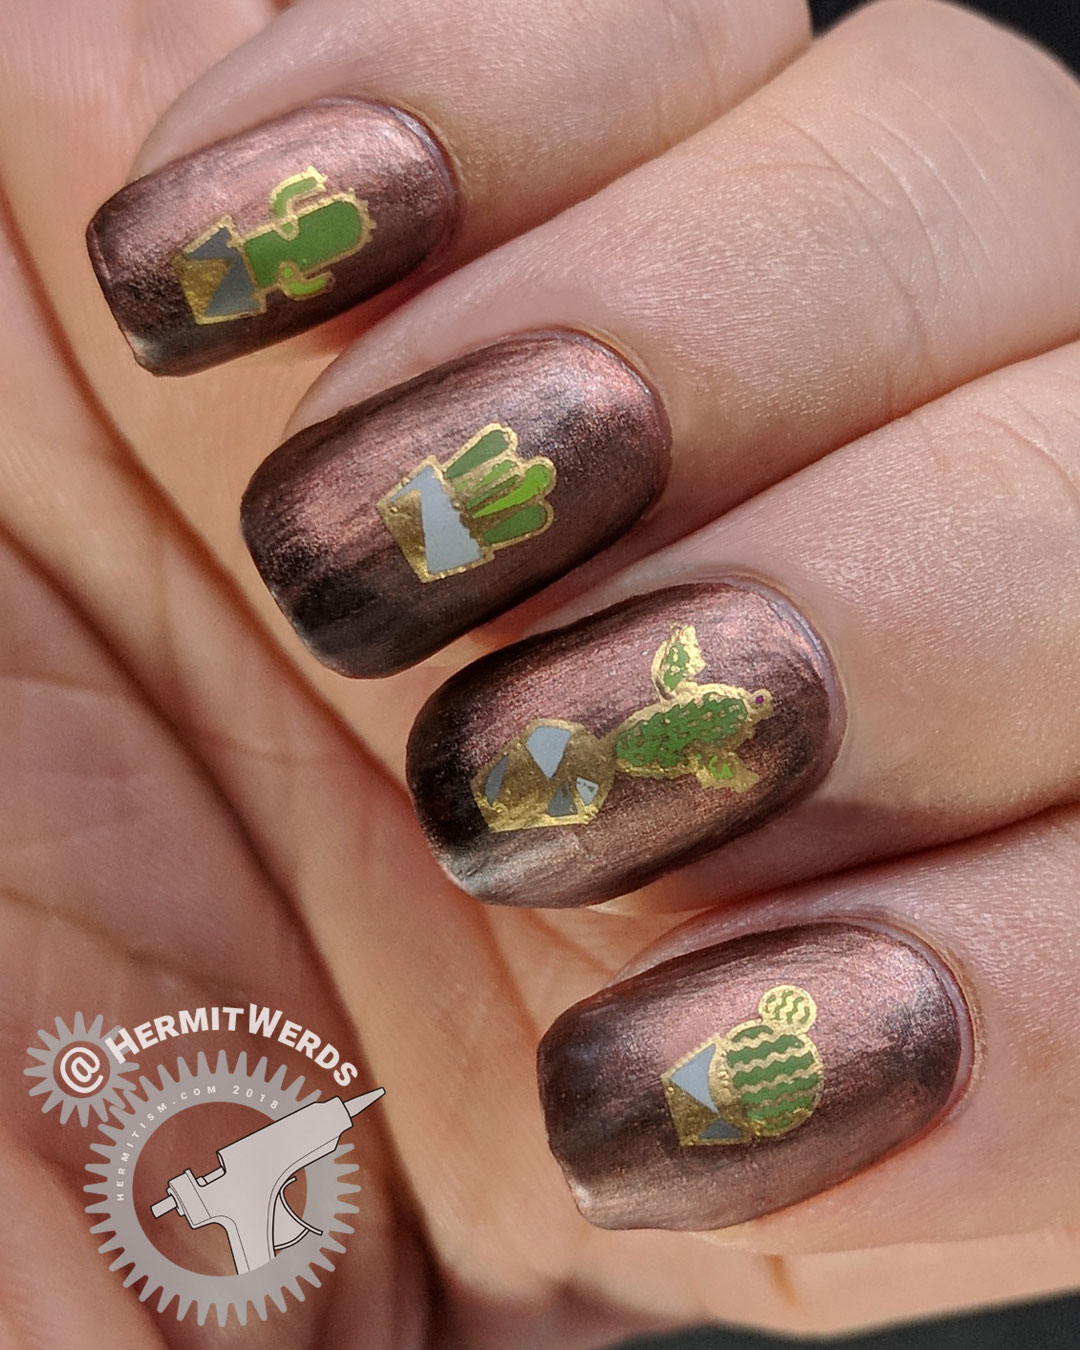 Concrete & Cacti - Hermit Werds - deep terracotta magnetic polish with cacti in concrete planters decals